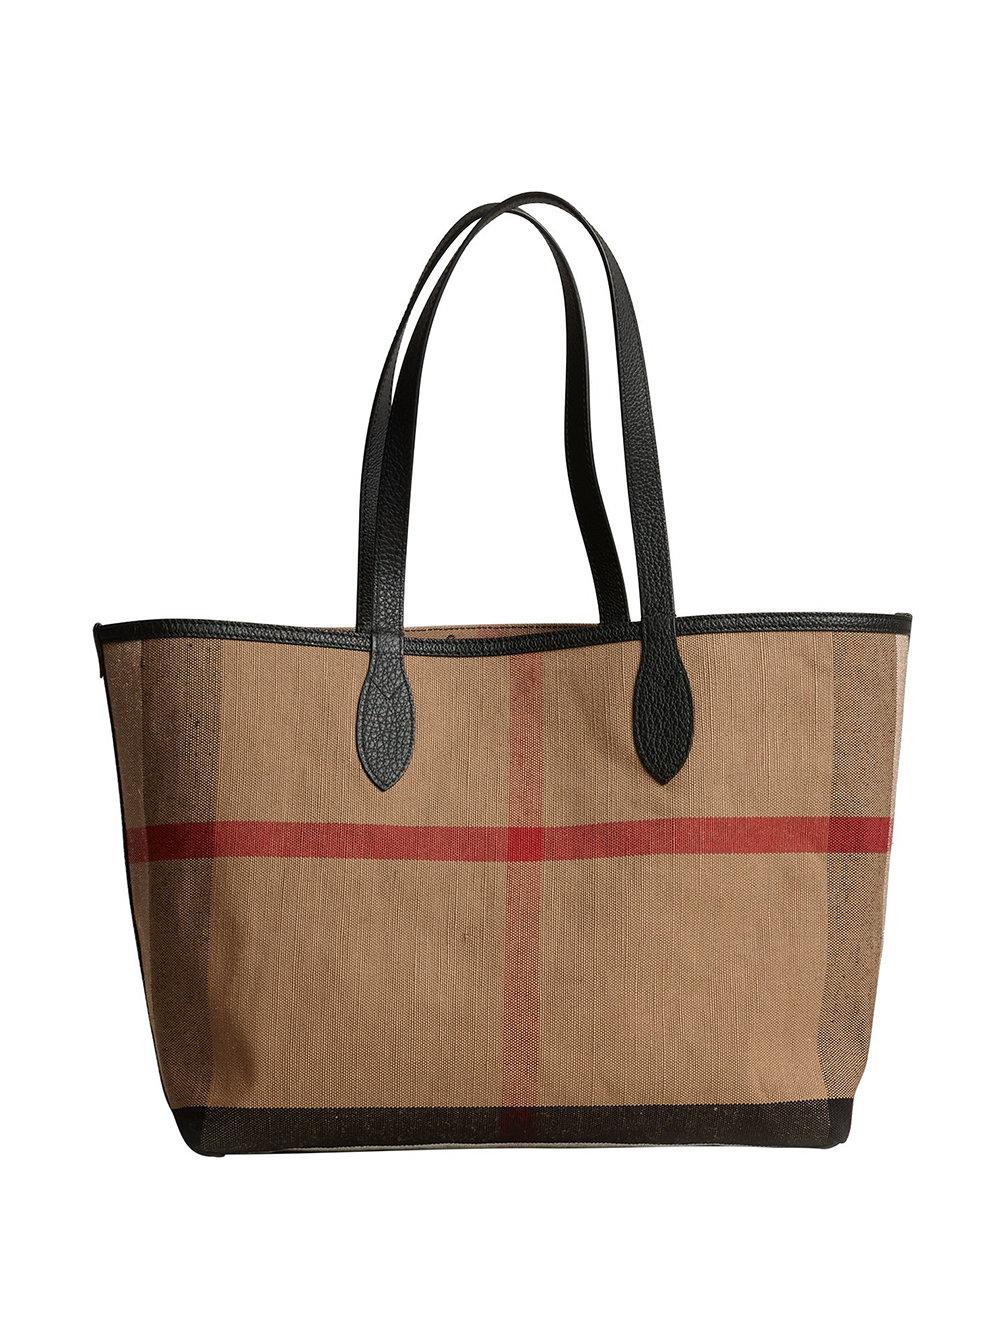 burberry doodle tote